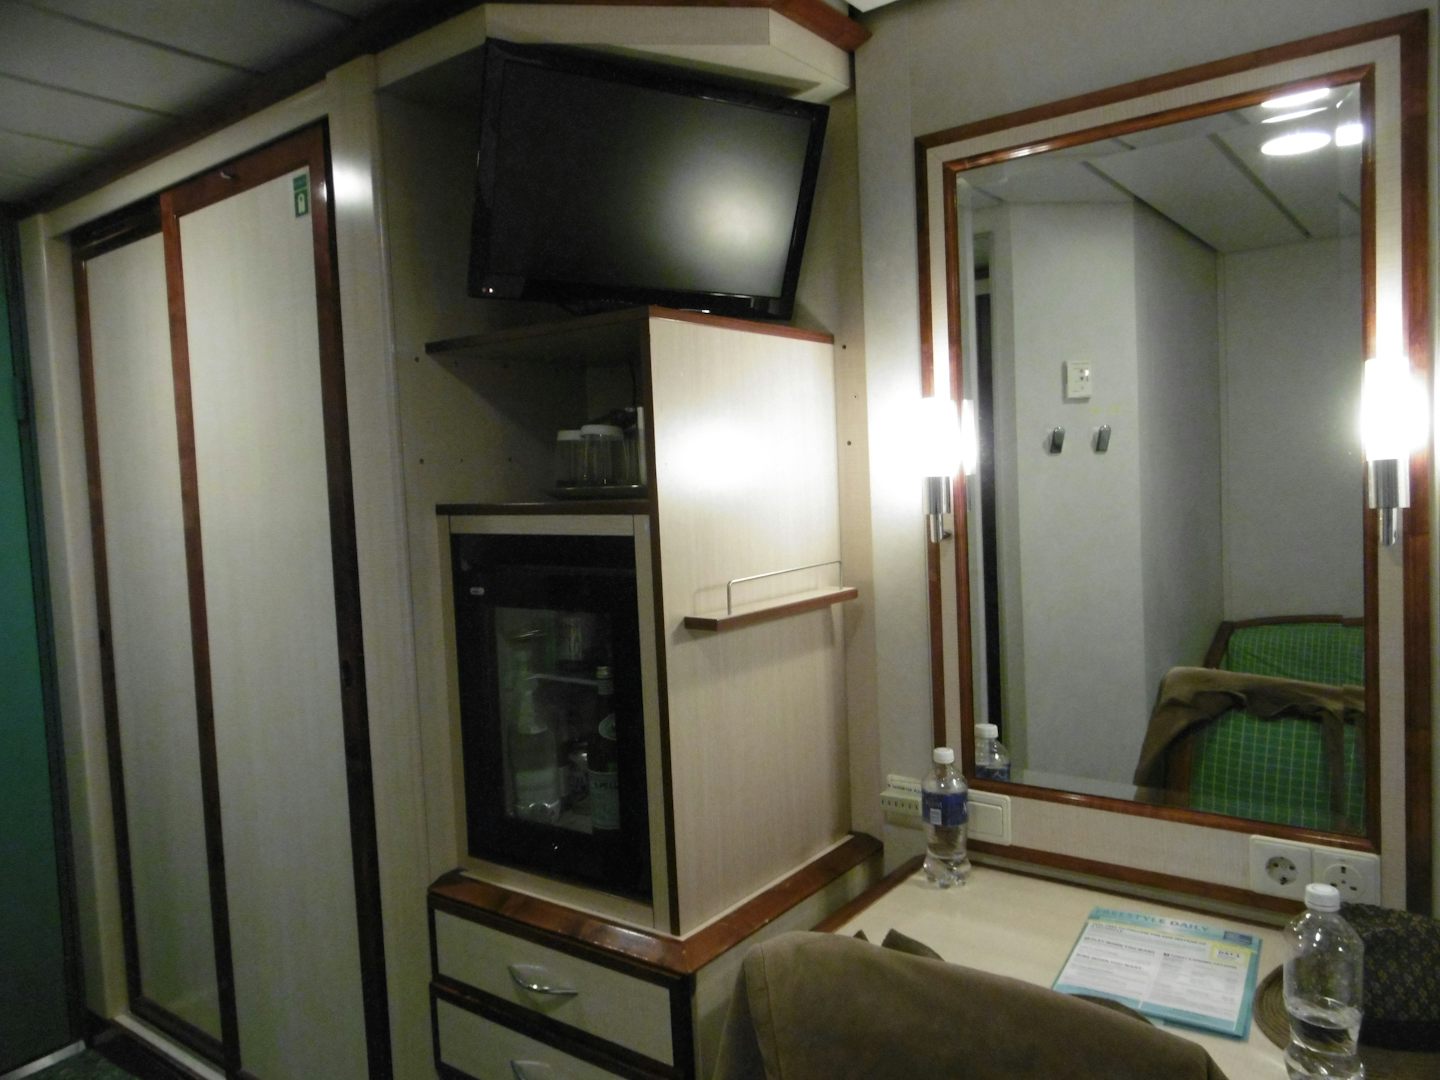 Inside cabin level 6. Wardrobe, tv, mini bar and dressing table. There was 2 plugs - one USA and one British.